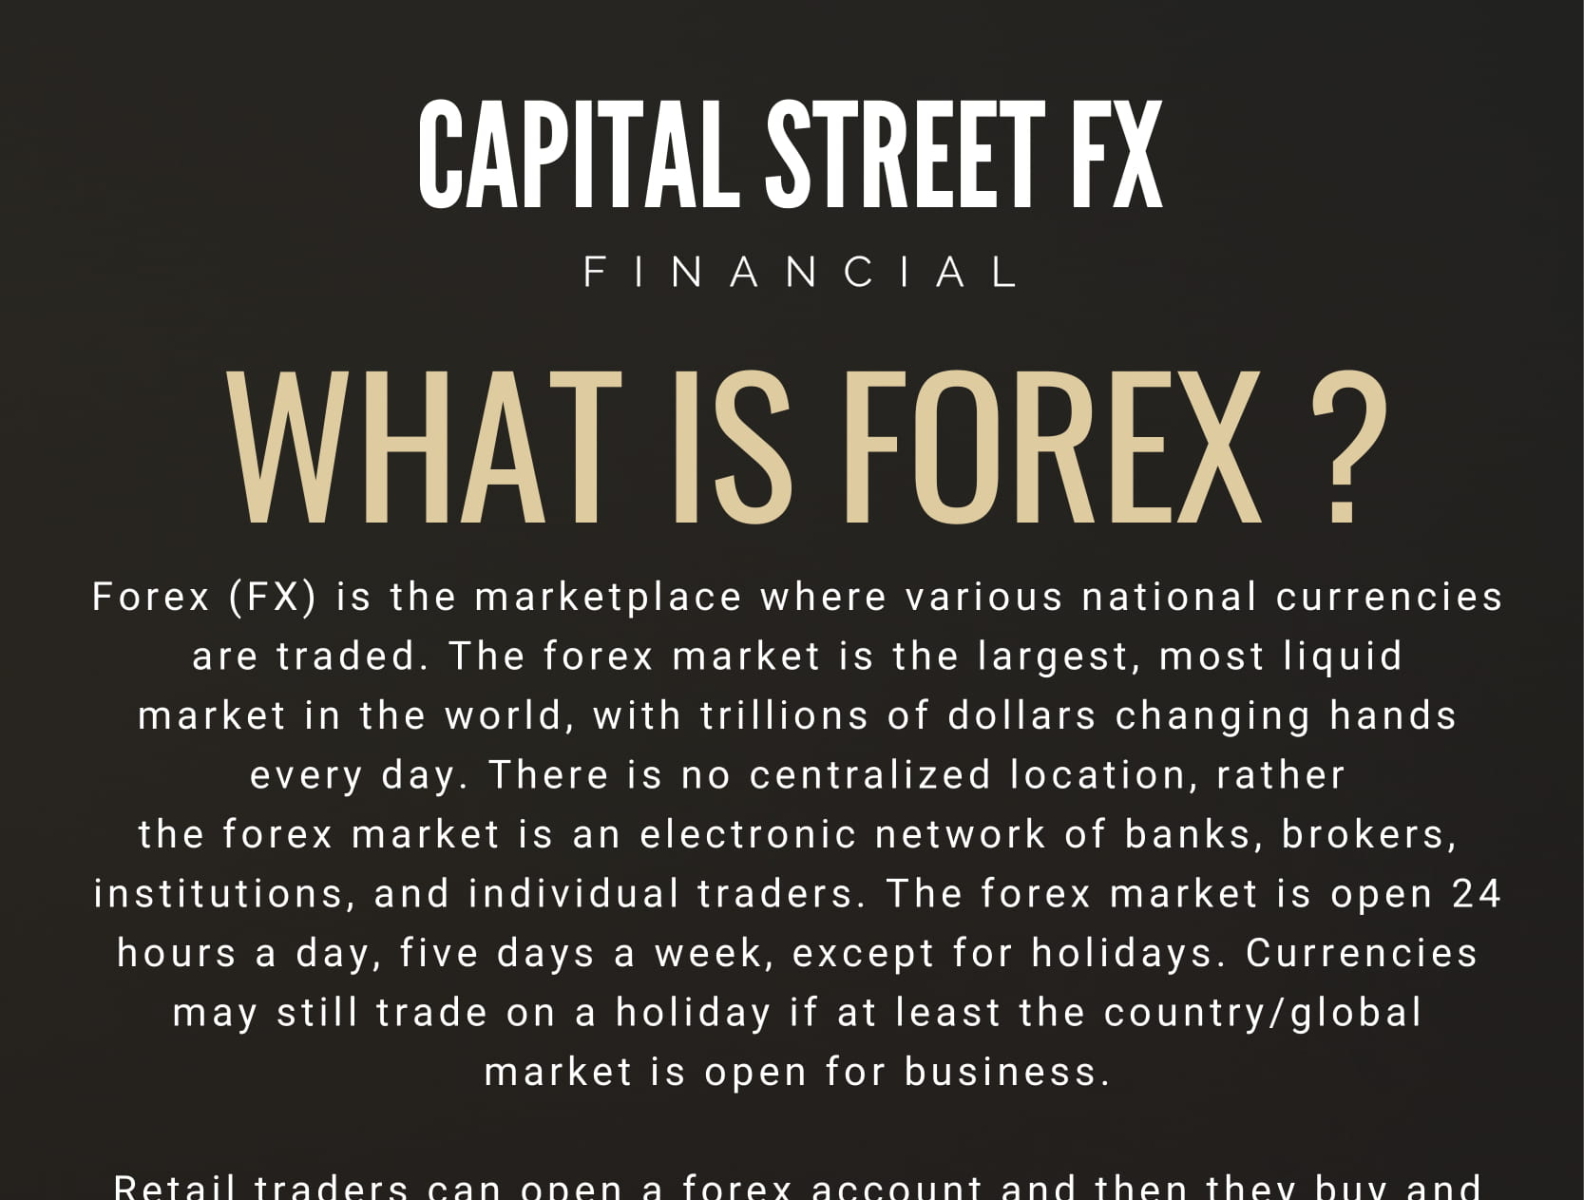 Capital Street Fx | What is Forex Trading and how does it work? by Capital  Street Fx on Dribbble